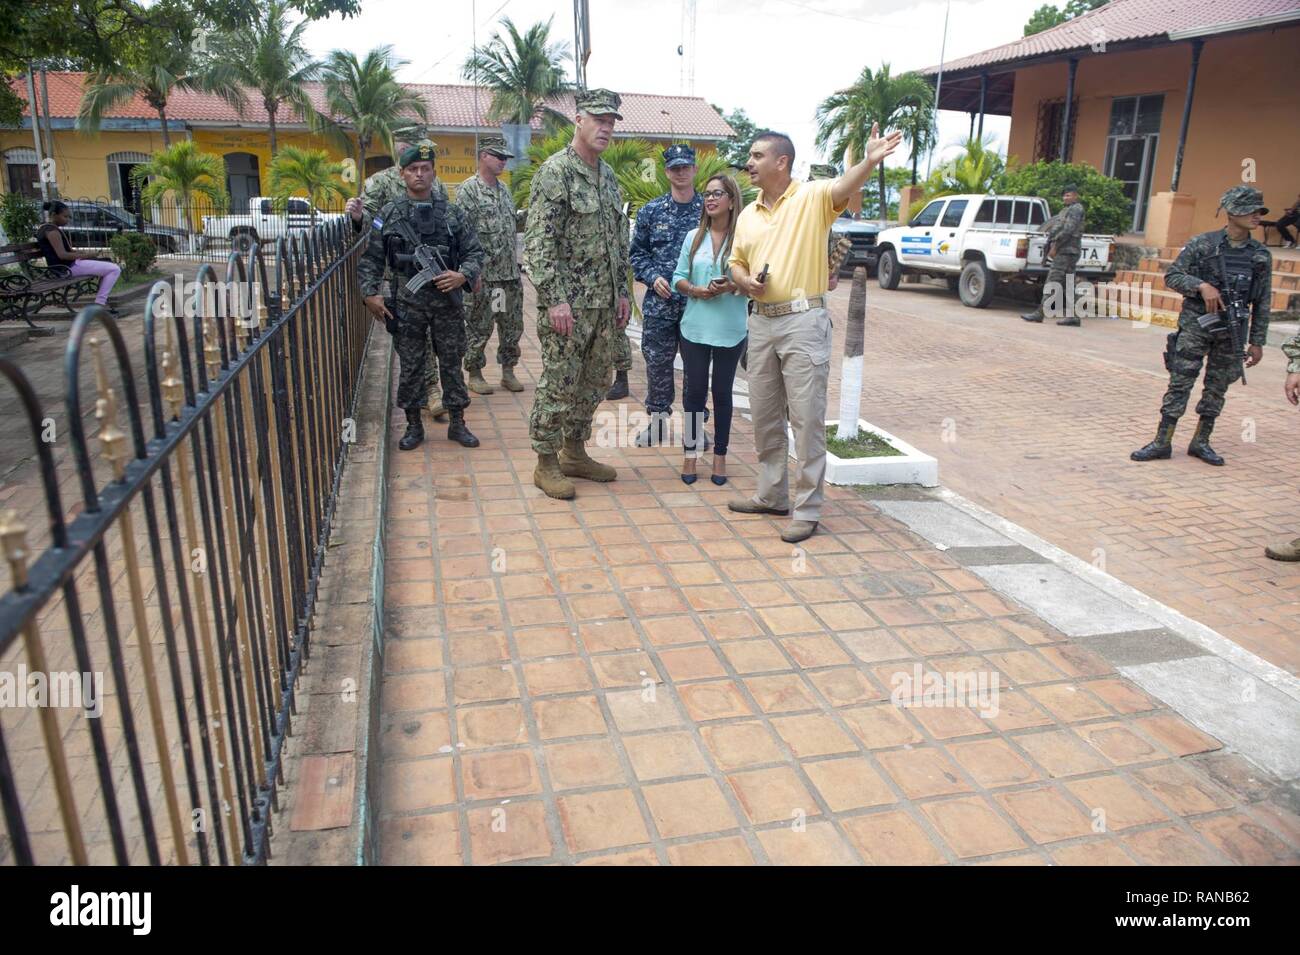 TRUJILLO, Honduras (Feb. 23, 2017) – Rear Adm. Sean S. Buck, Commander U.S. Naval Forces Southern Command/U.S. 4th Fleet, receives a tour from the acting governor of Colon, Honduras during a tour of the Continuing Promise 2017 (CP-17) mission sites in support of CP-17's visit to Trujillo, Honduras. CP-17 is a U.S. Southern Command-sponsored and U.S. Naval Forces Southern Command/U.S. 4th Fleet-conducted deployment to conduct civil-military operations including humanitarian assistance, training engagements, and medical, dental, and veterinary support in an effort to show U.S. support and commit Stock Photo